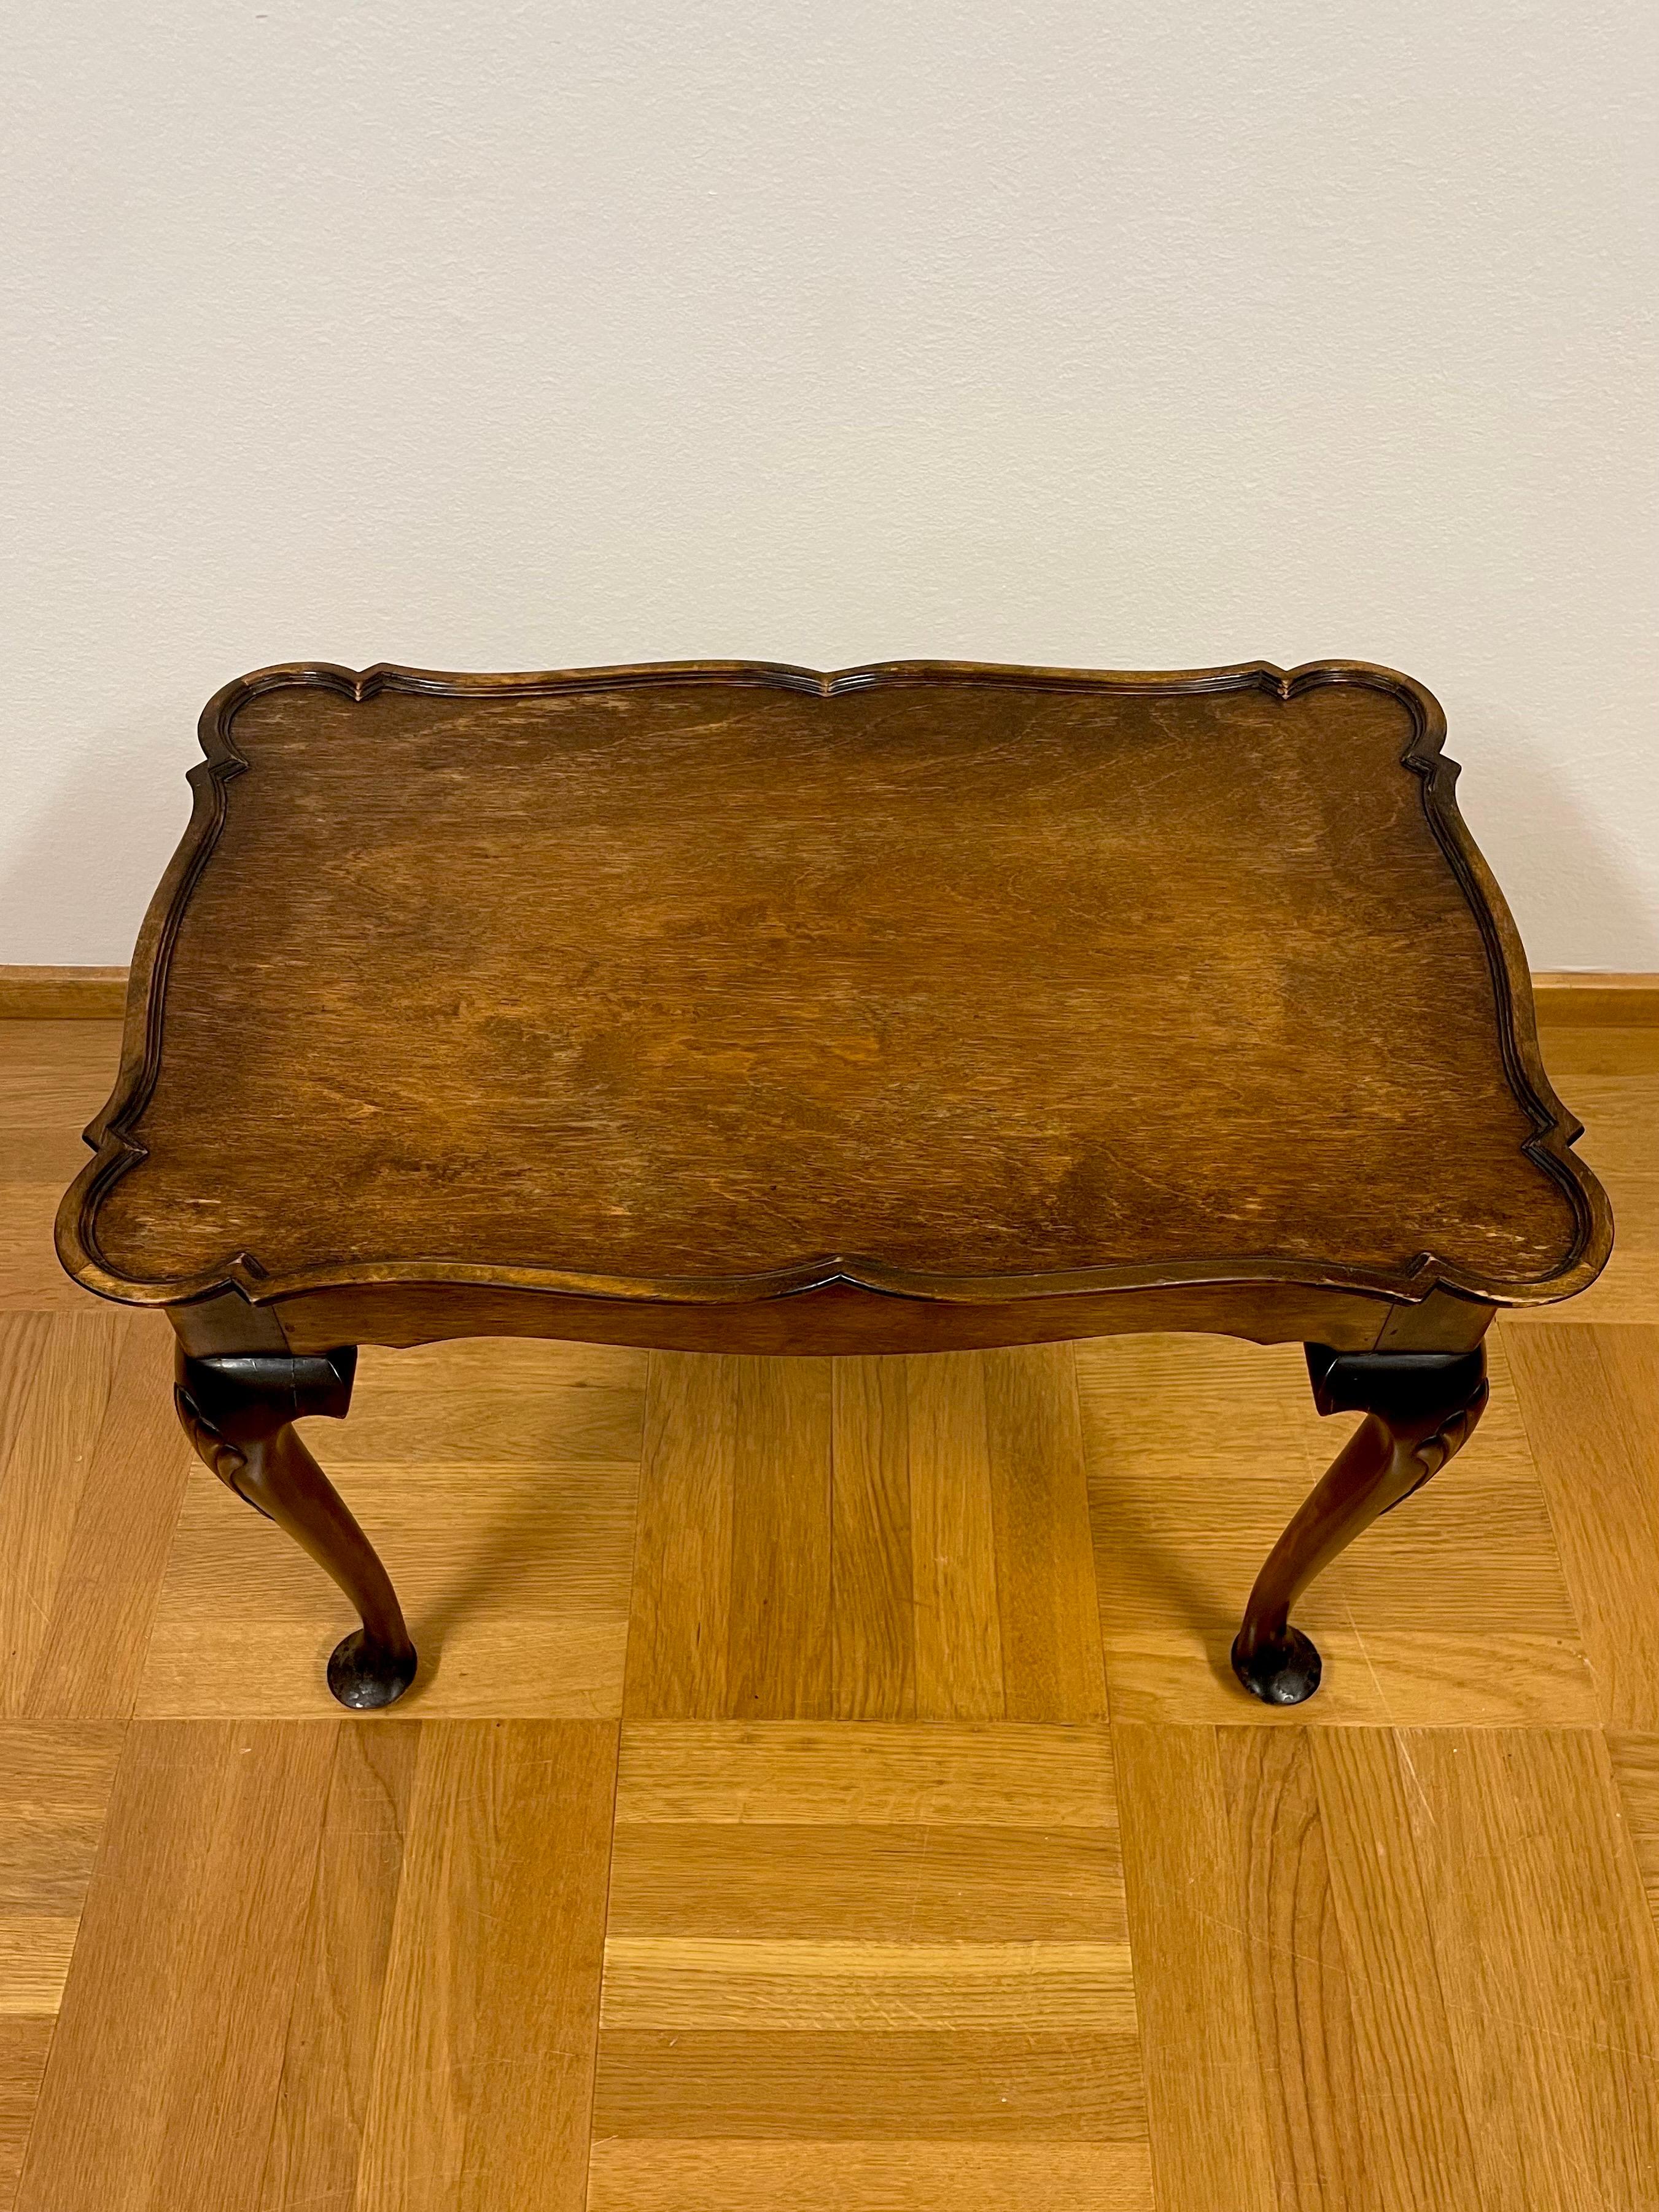 Hand-Carved Swedish Tray Table in Stained Birch Manufactured 13/3 1929 by Nordiska Kompaniet For Sale